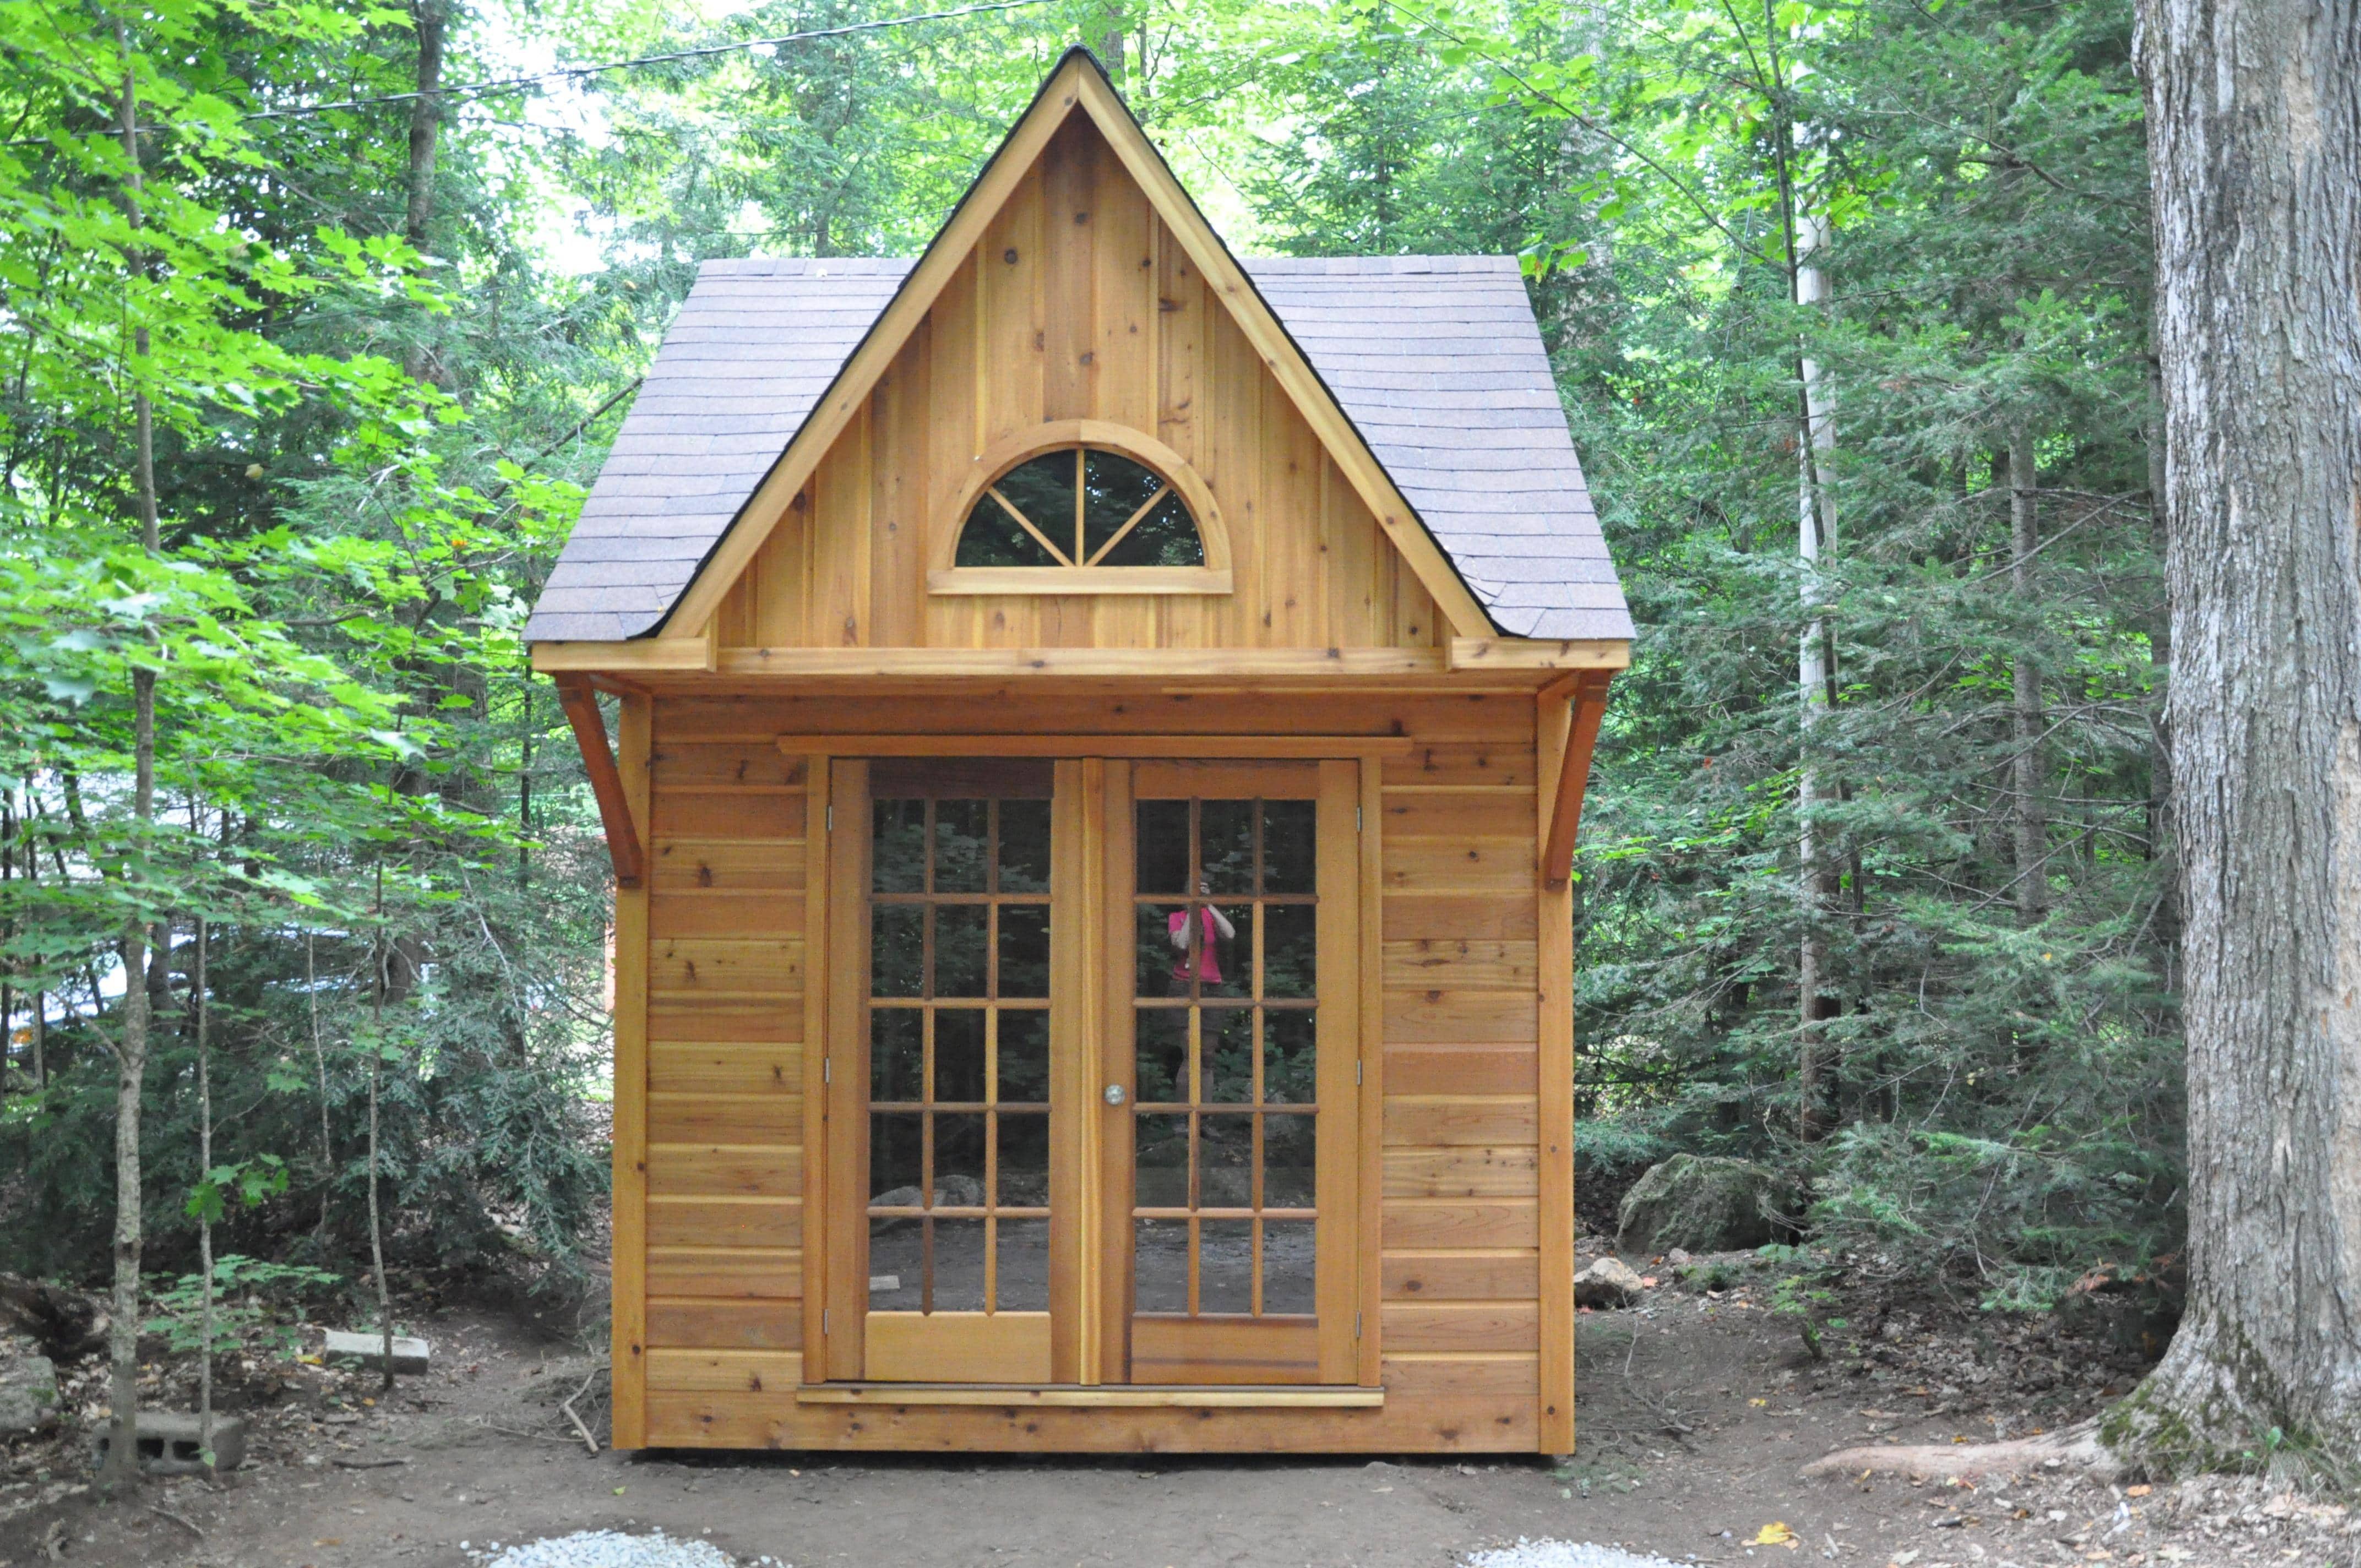  Bala bunkie 10 x 10 with french doors in Wood Lake Ontario. ID number 180626-1